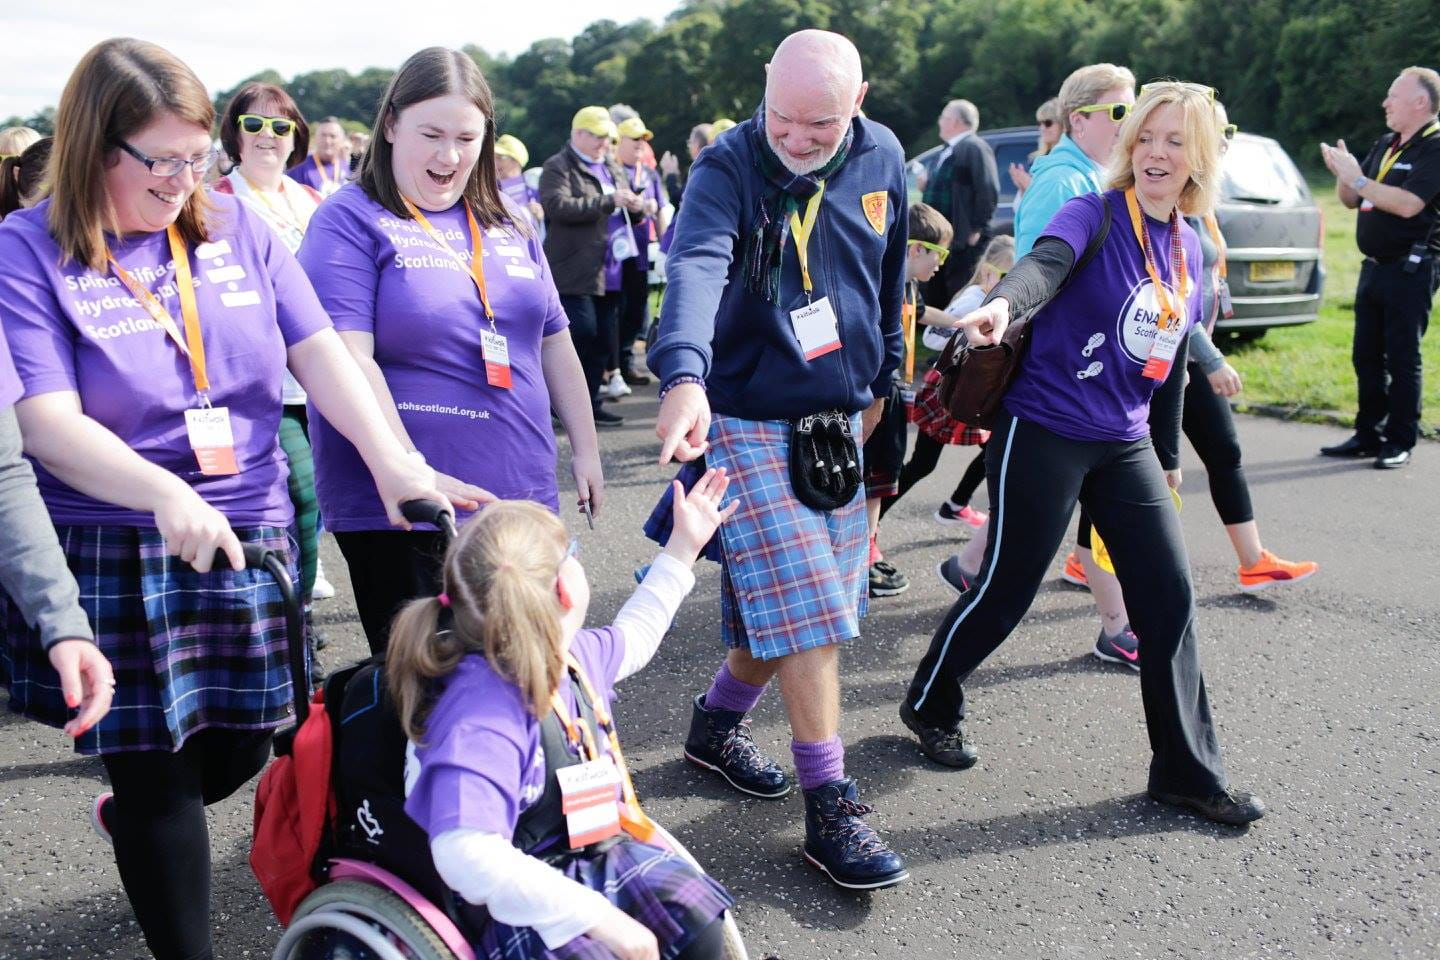 Cole AD supports charity partner at The Kiltwalk